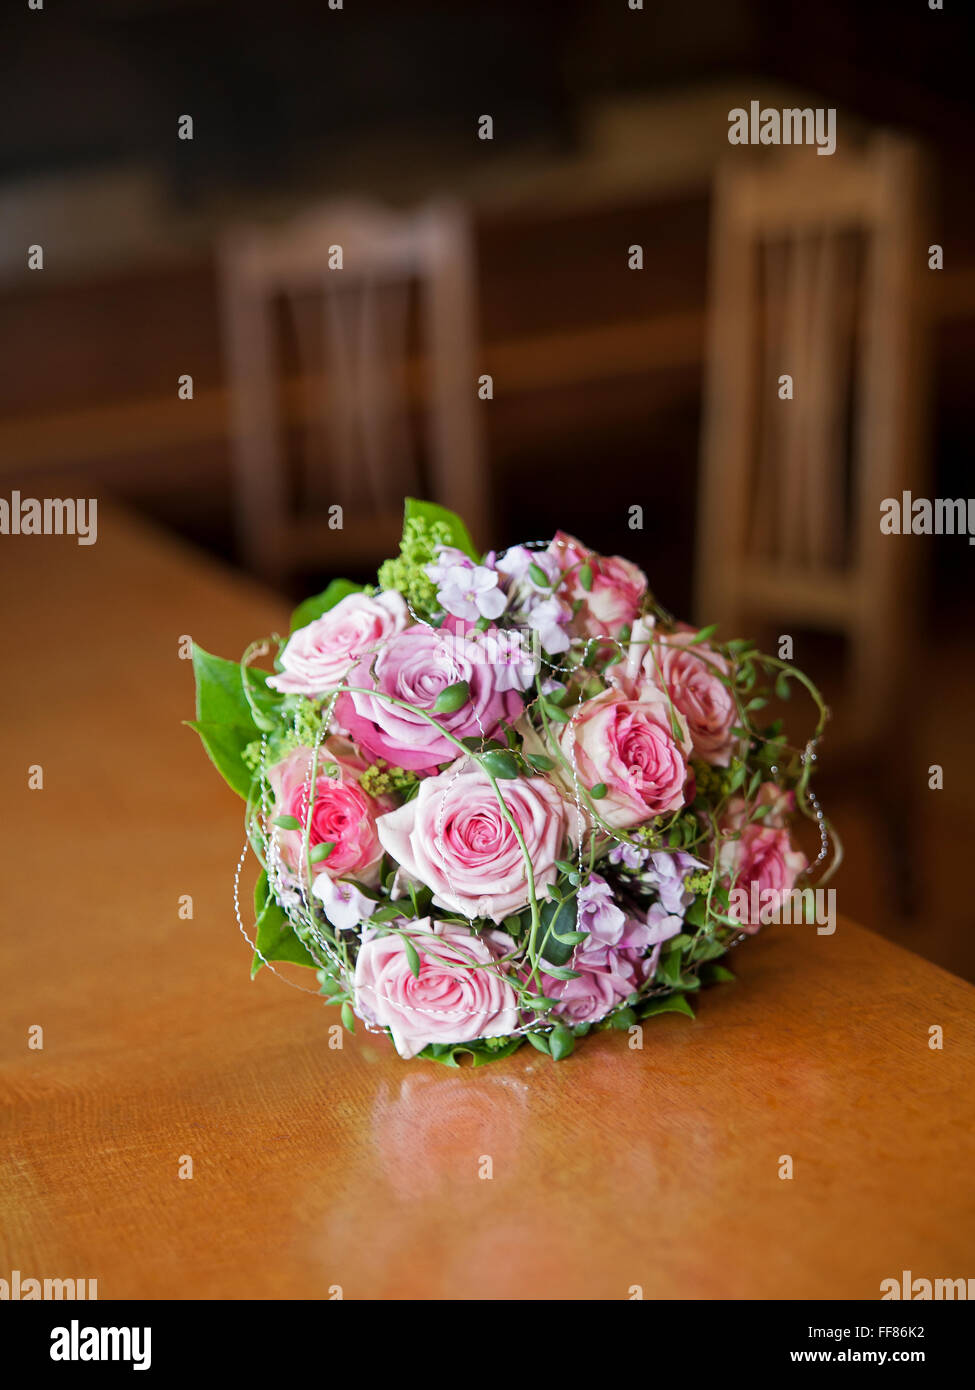 Bridal bouquet with colorful roses on a table Stock Photo